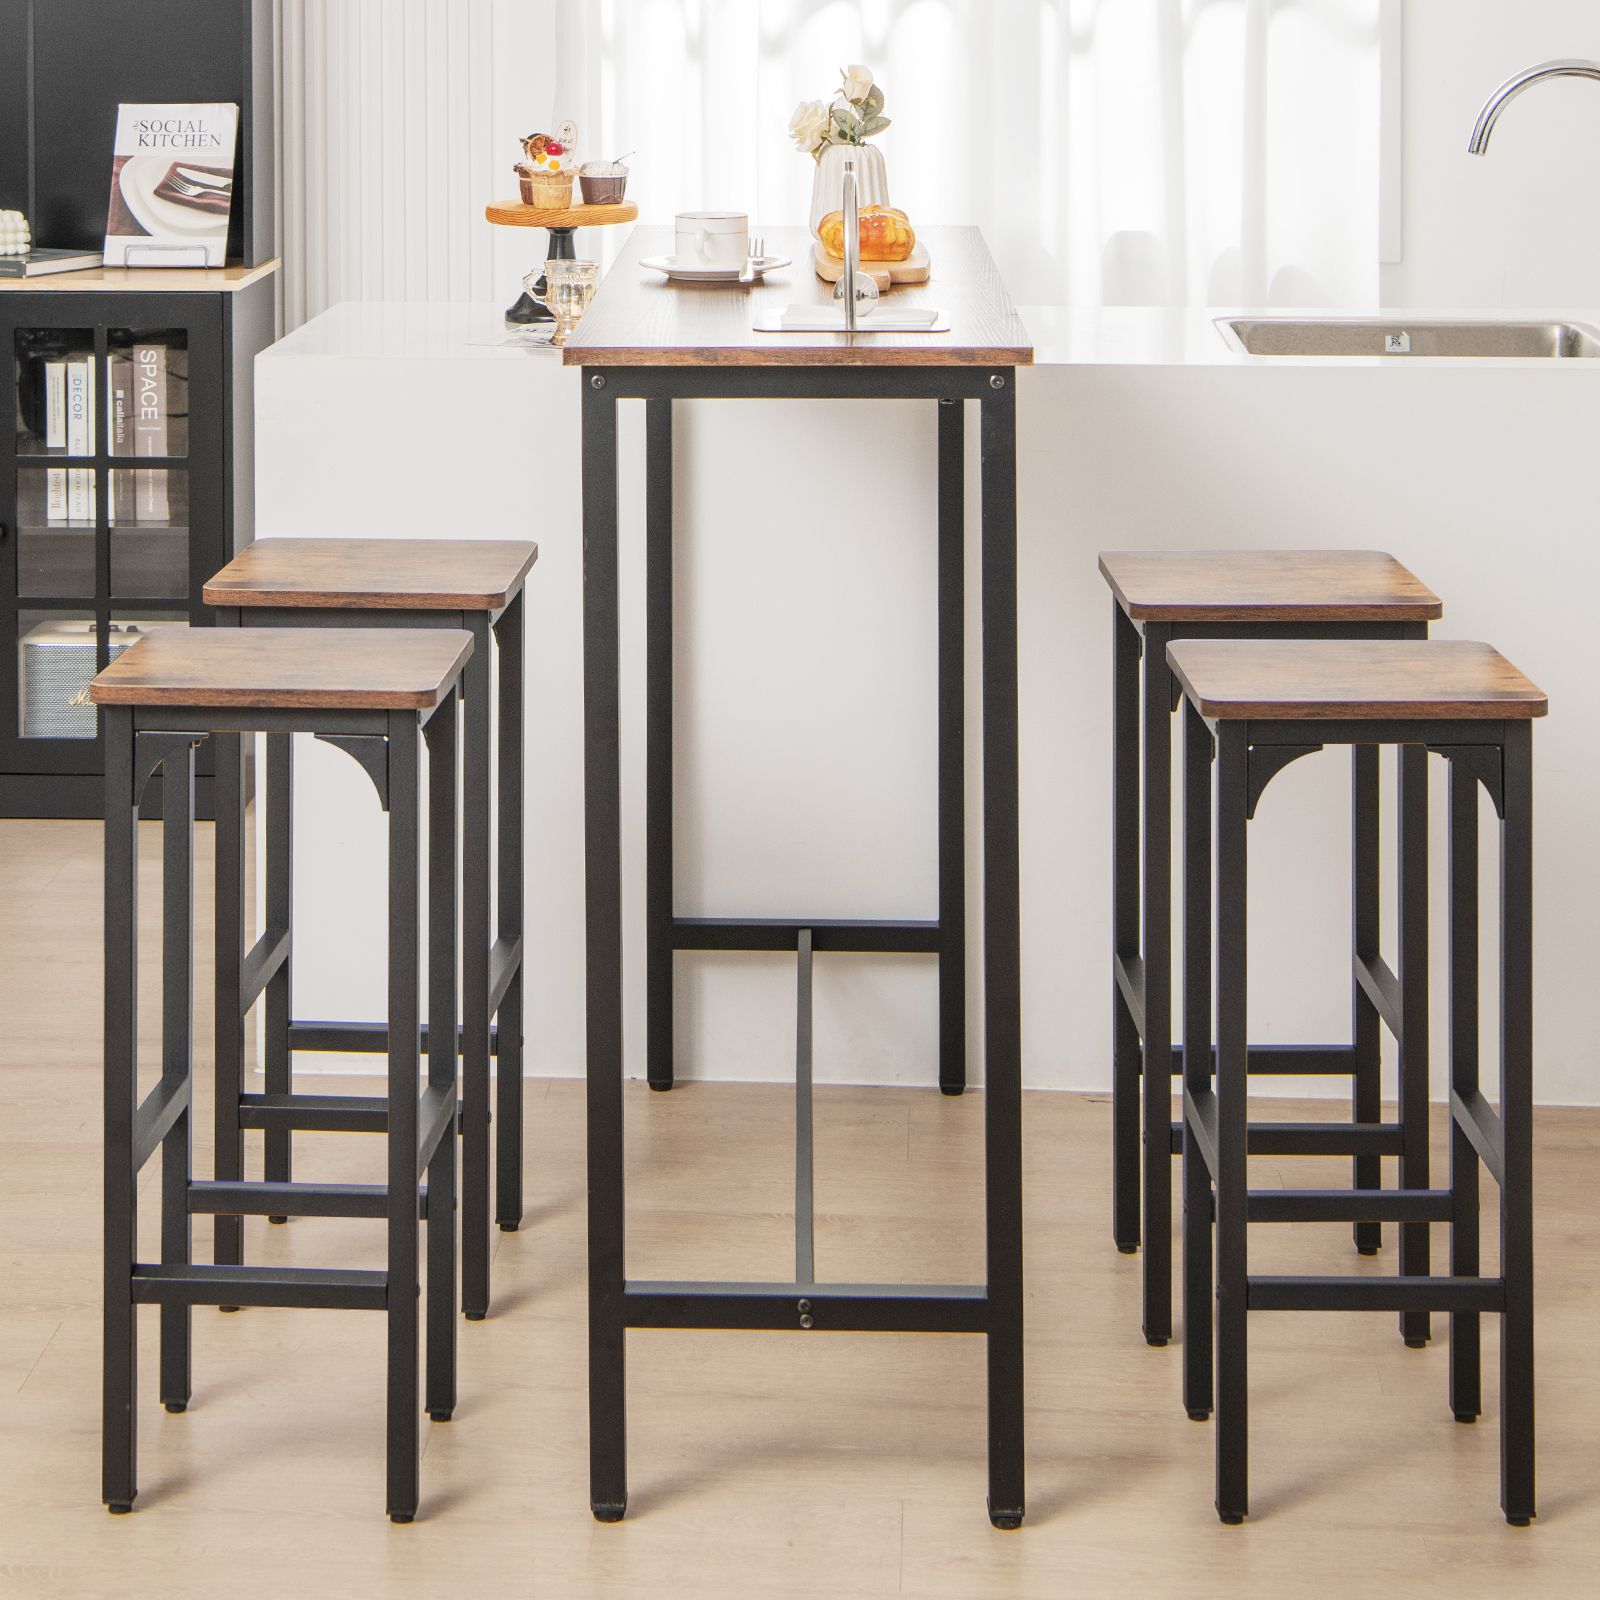 30 x 30 x 71cm Bar Stools Set of 2 with Footrest and Adjustable Pads